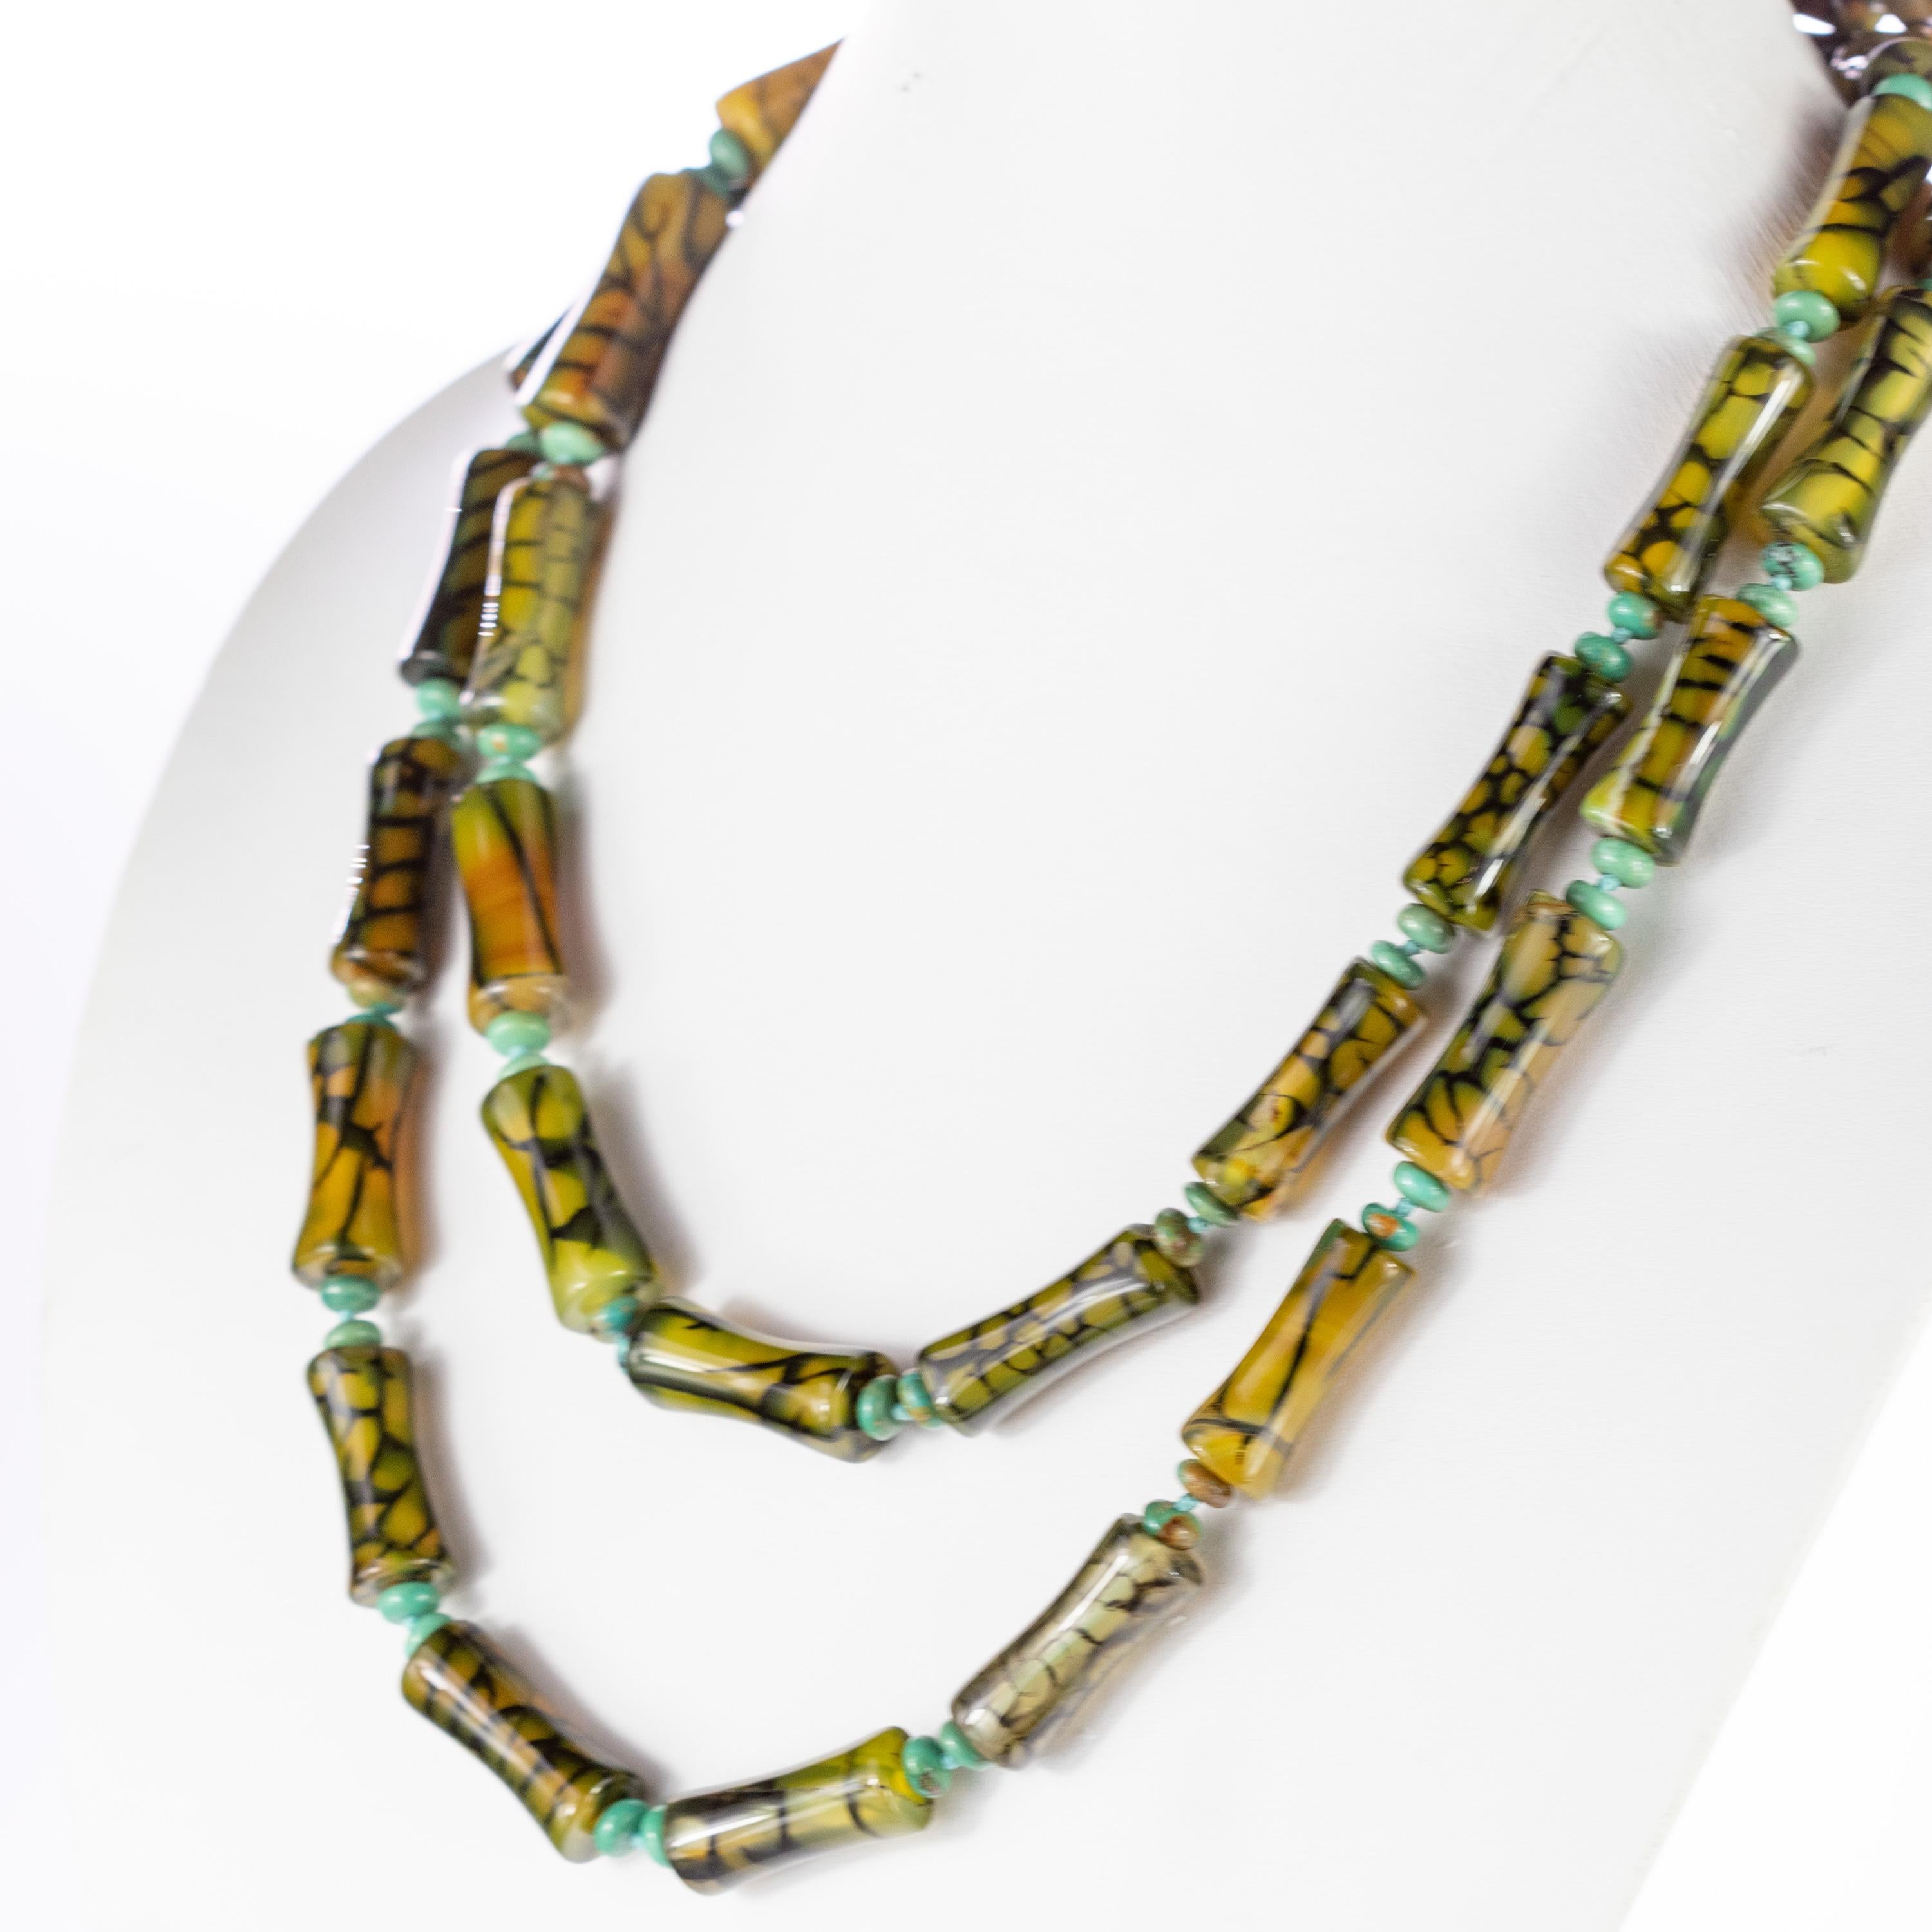 info?
Long wrap around necklace with variegated green agate tubes and round natural turquoise. Breathtaking and one of a kind handmade embellished with extraordinary colors evoking a volcano. Oranges, brown and greens with multiple hues come